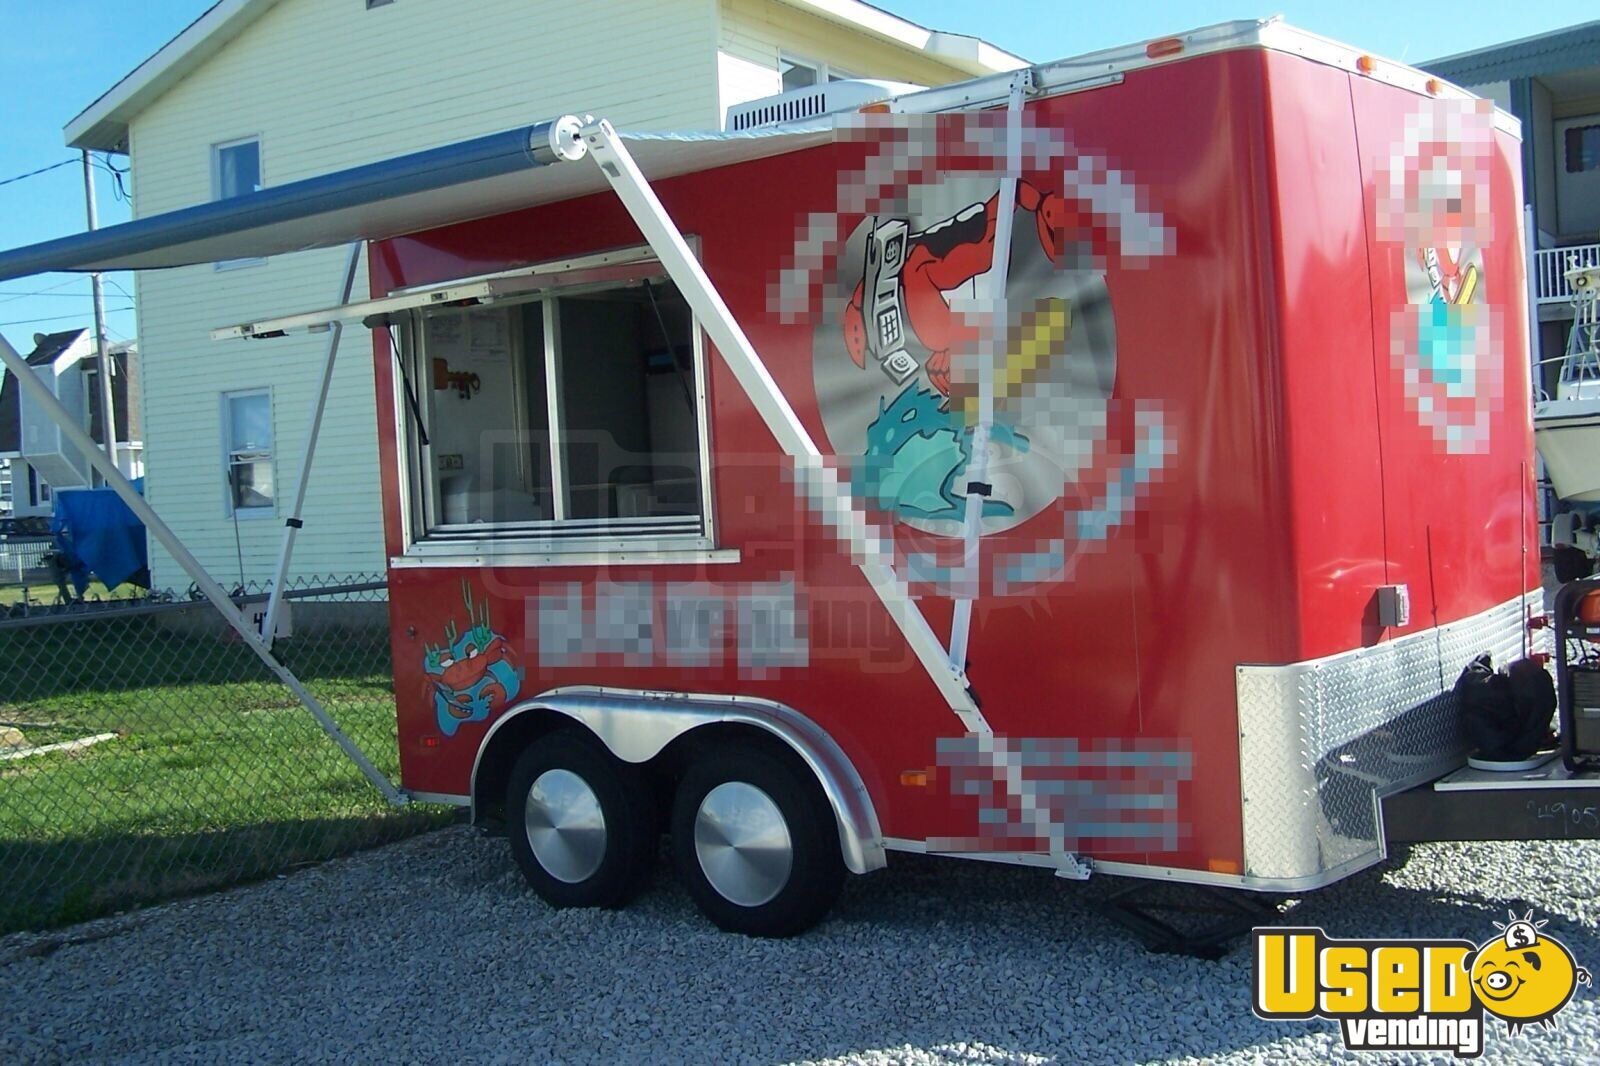 Used 2013 Concession Trailer in New Jersey for Sale ...